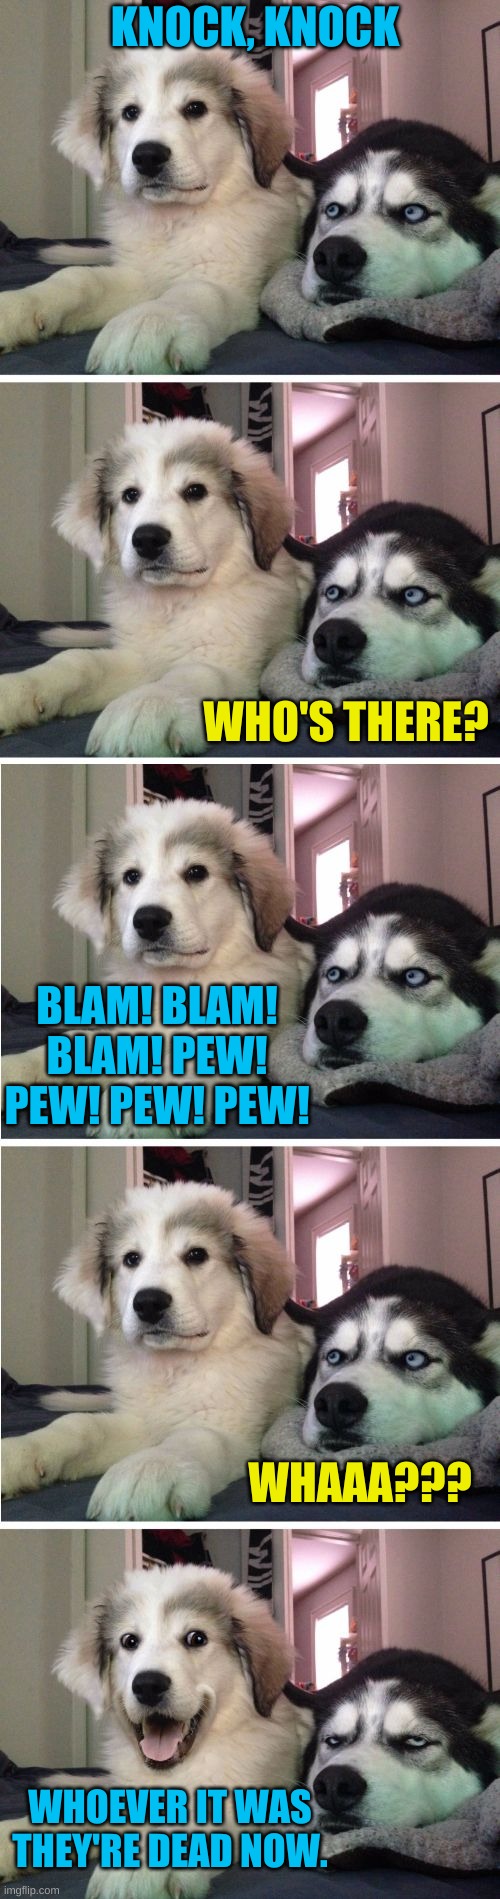 Why it's important to stay home.... People are really scared right now. | KNOCK, KNOCK; WHO'S THERE? BLAM! BLAM! BLAM! PEW! PEW! PEW! PEW! WHAAA??? WHOEVER IT WAS THEY'RE DEAD NOW. | image tagged in knock knock dogs | made w/ Imgflip meme maker